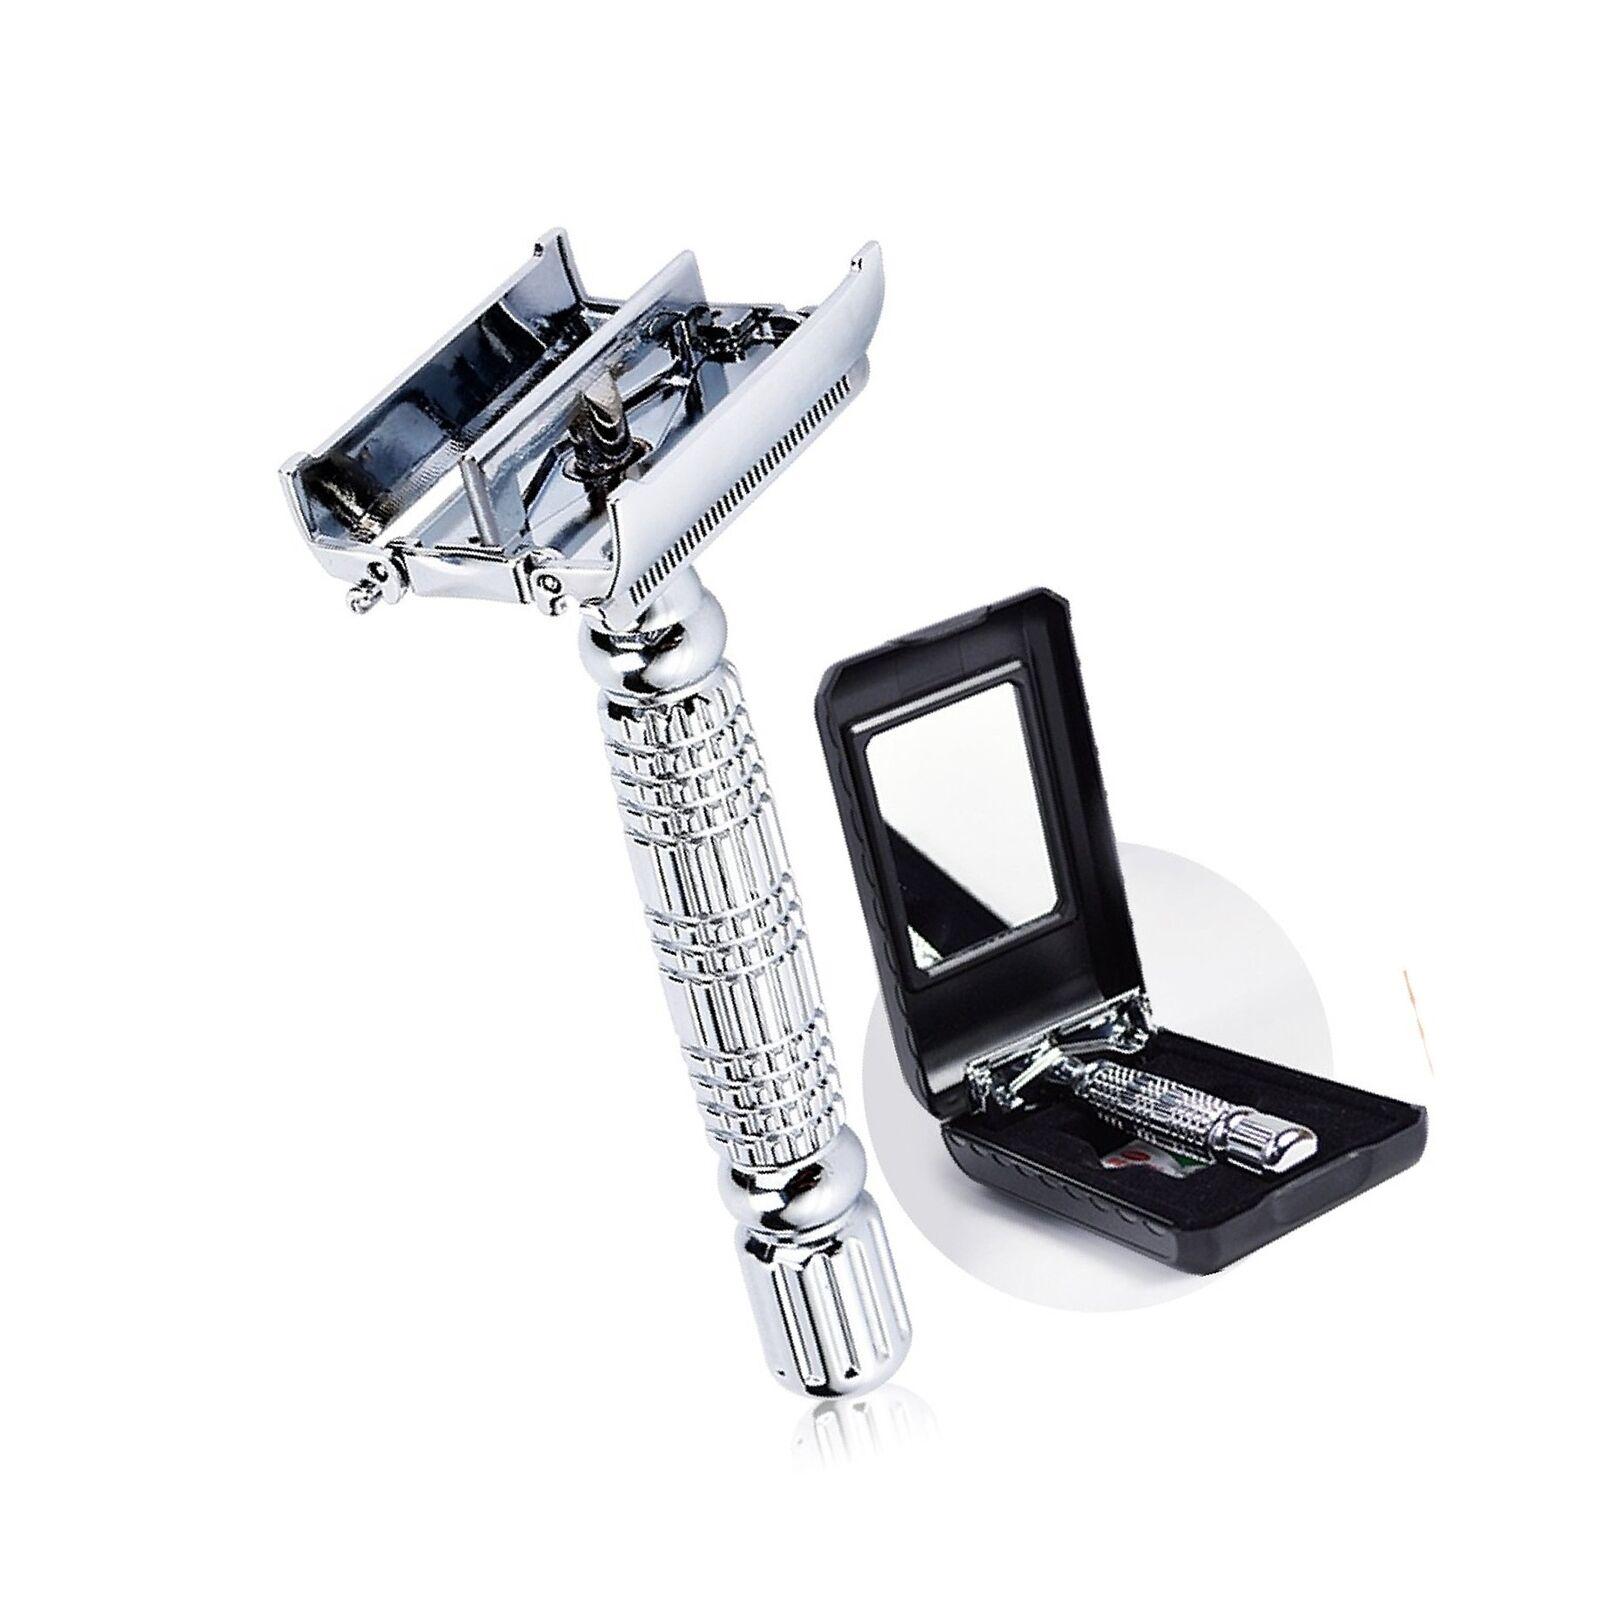 Barber Safety Blade Razor Shaver Double Edge Butterfly Twist Open T-Shaped Unisex 1 Travel Case with Mirror